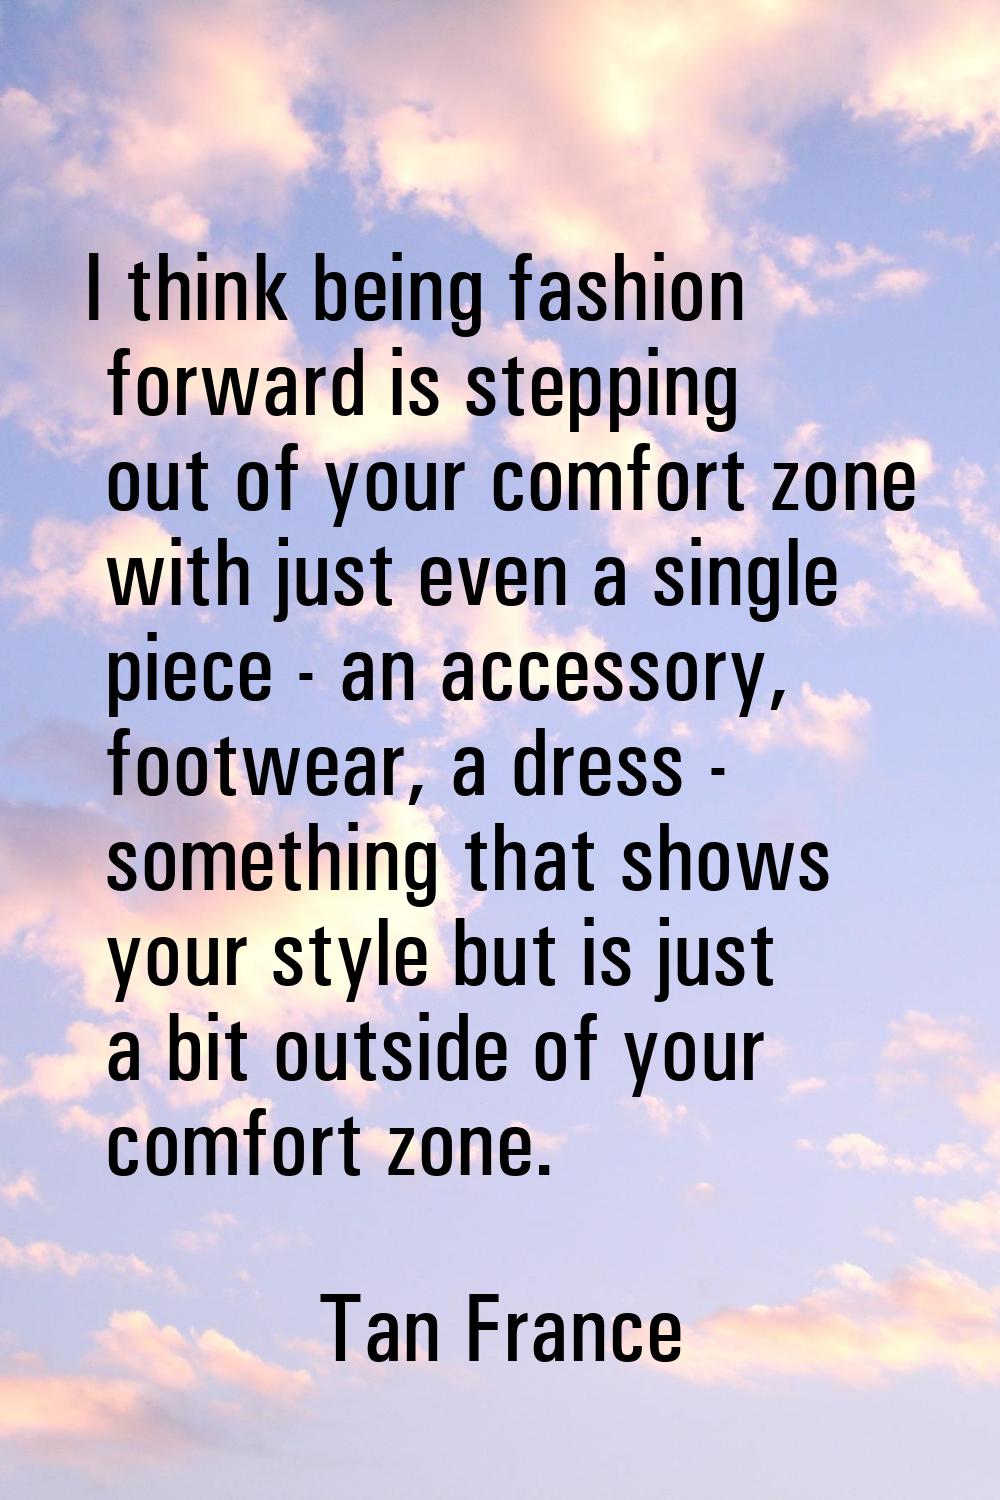 I think being fashion forward is stepping out of your comfort zone with just even a single piece - 